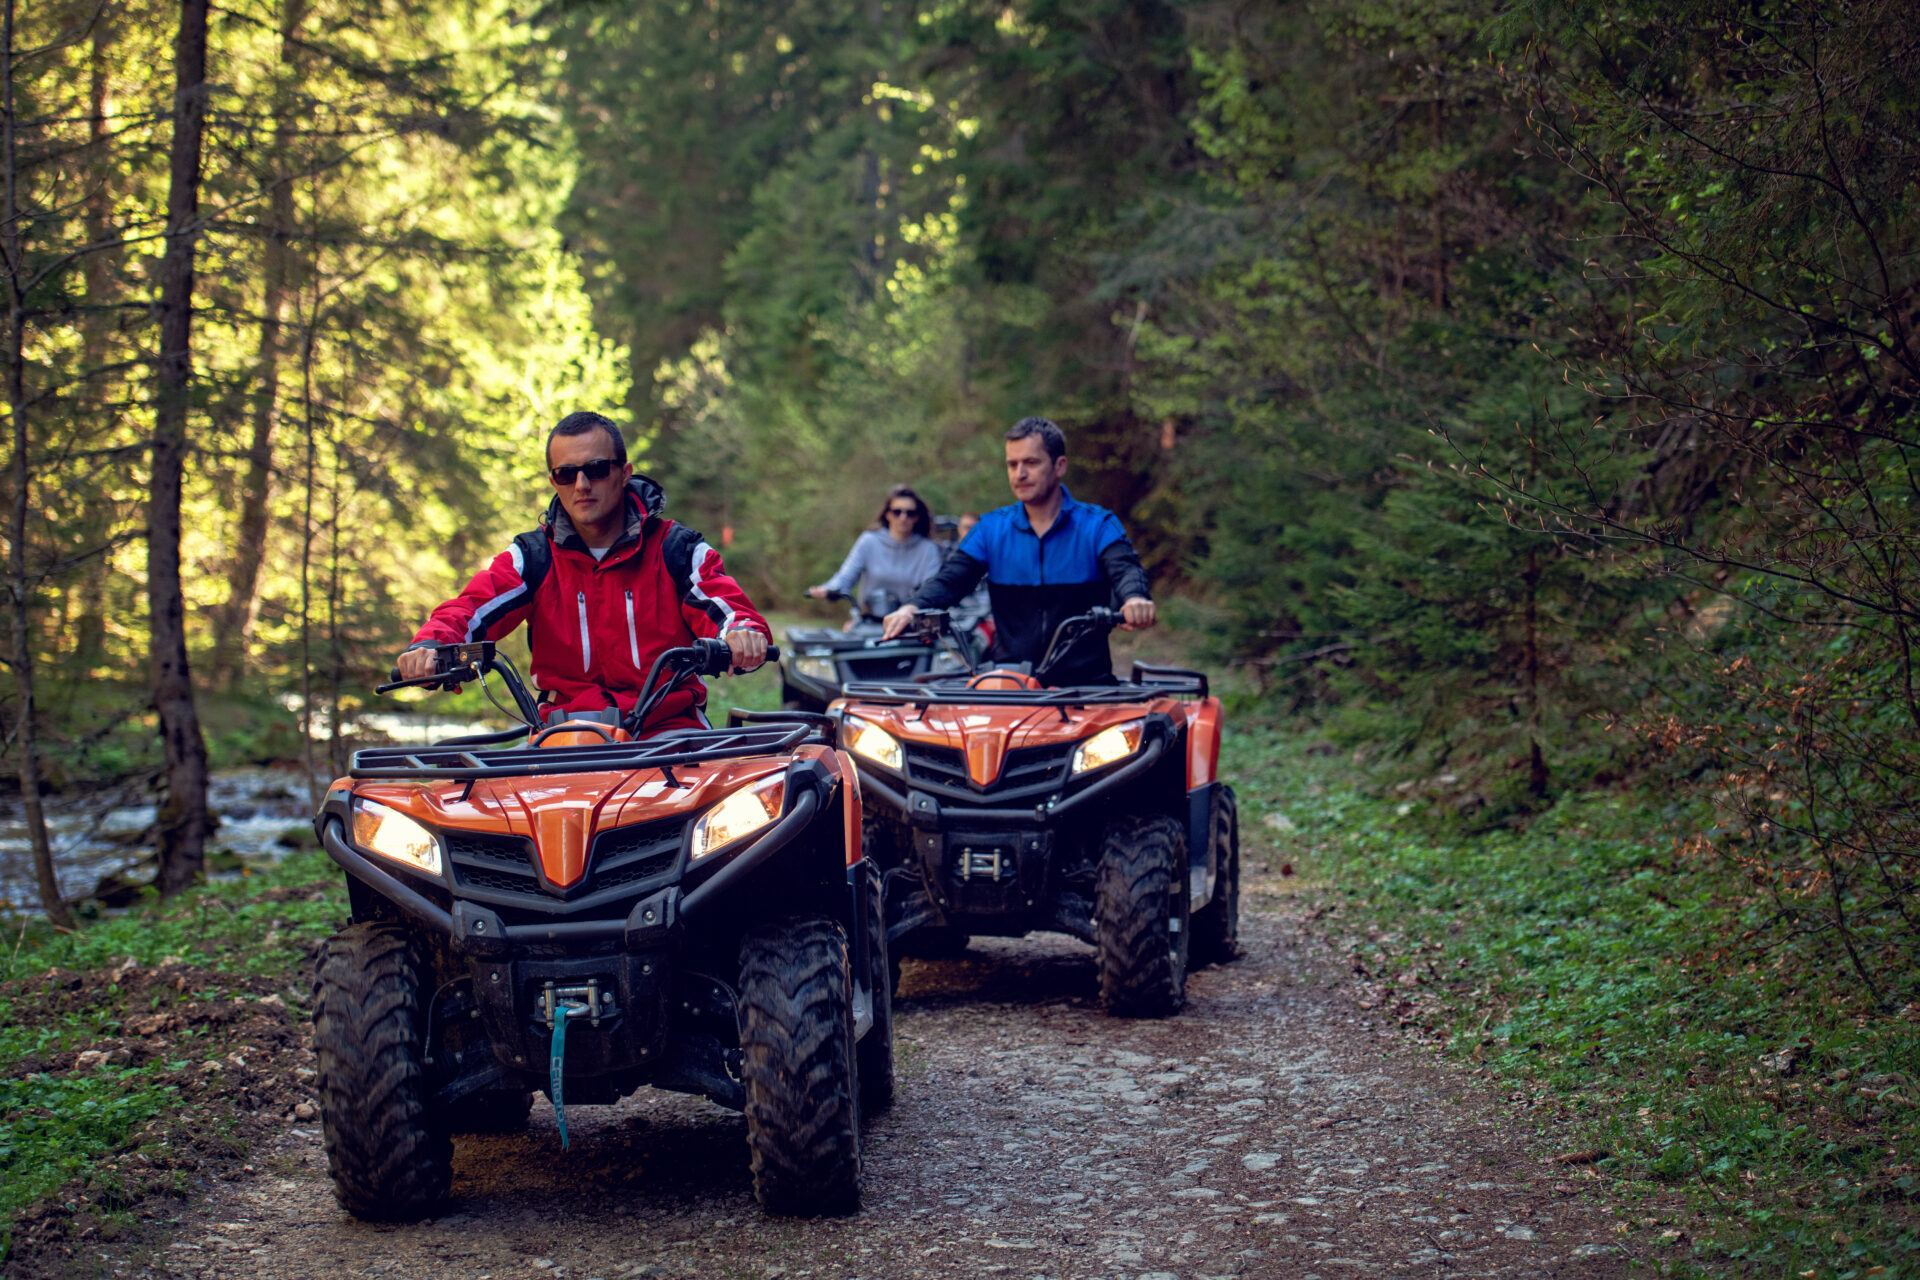 Three people riding ATVs . Two men, one woman. The man in the front is wearing a red jacket and sunglasses. The man behind him is in blue jacket and the woman in the rear is in a grey shirt.